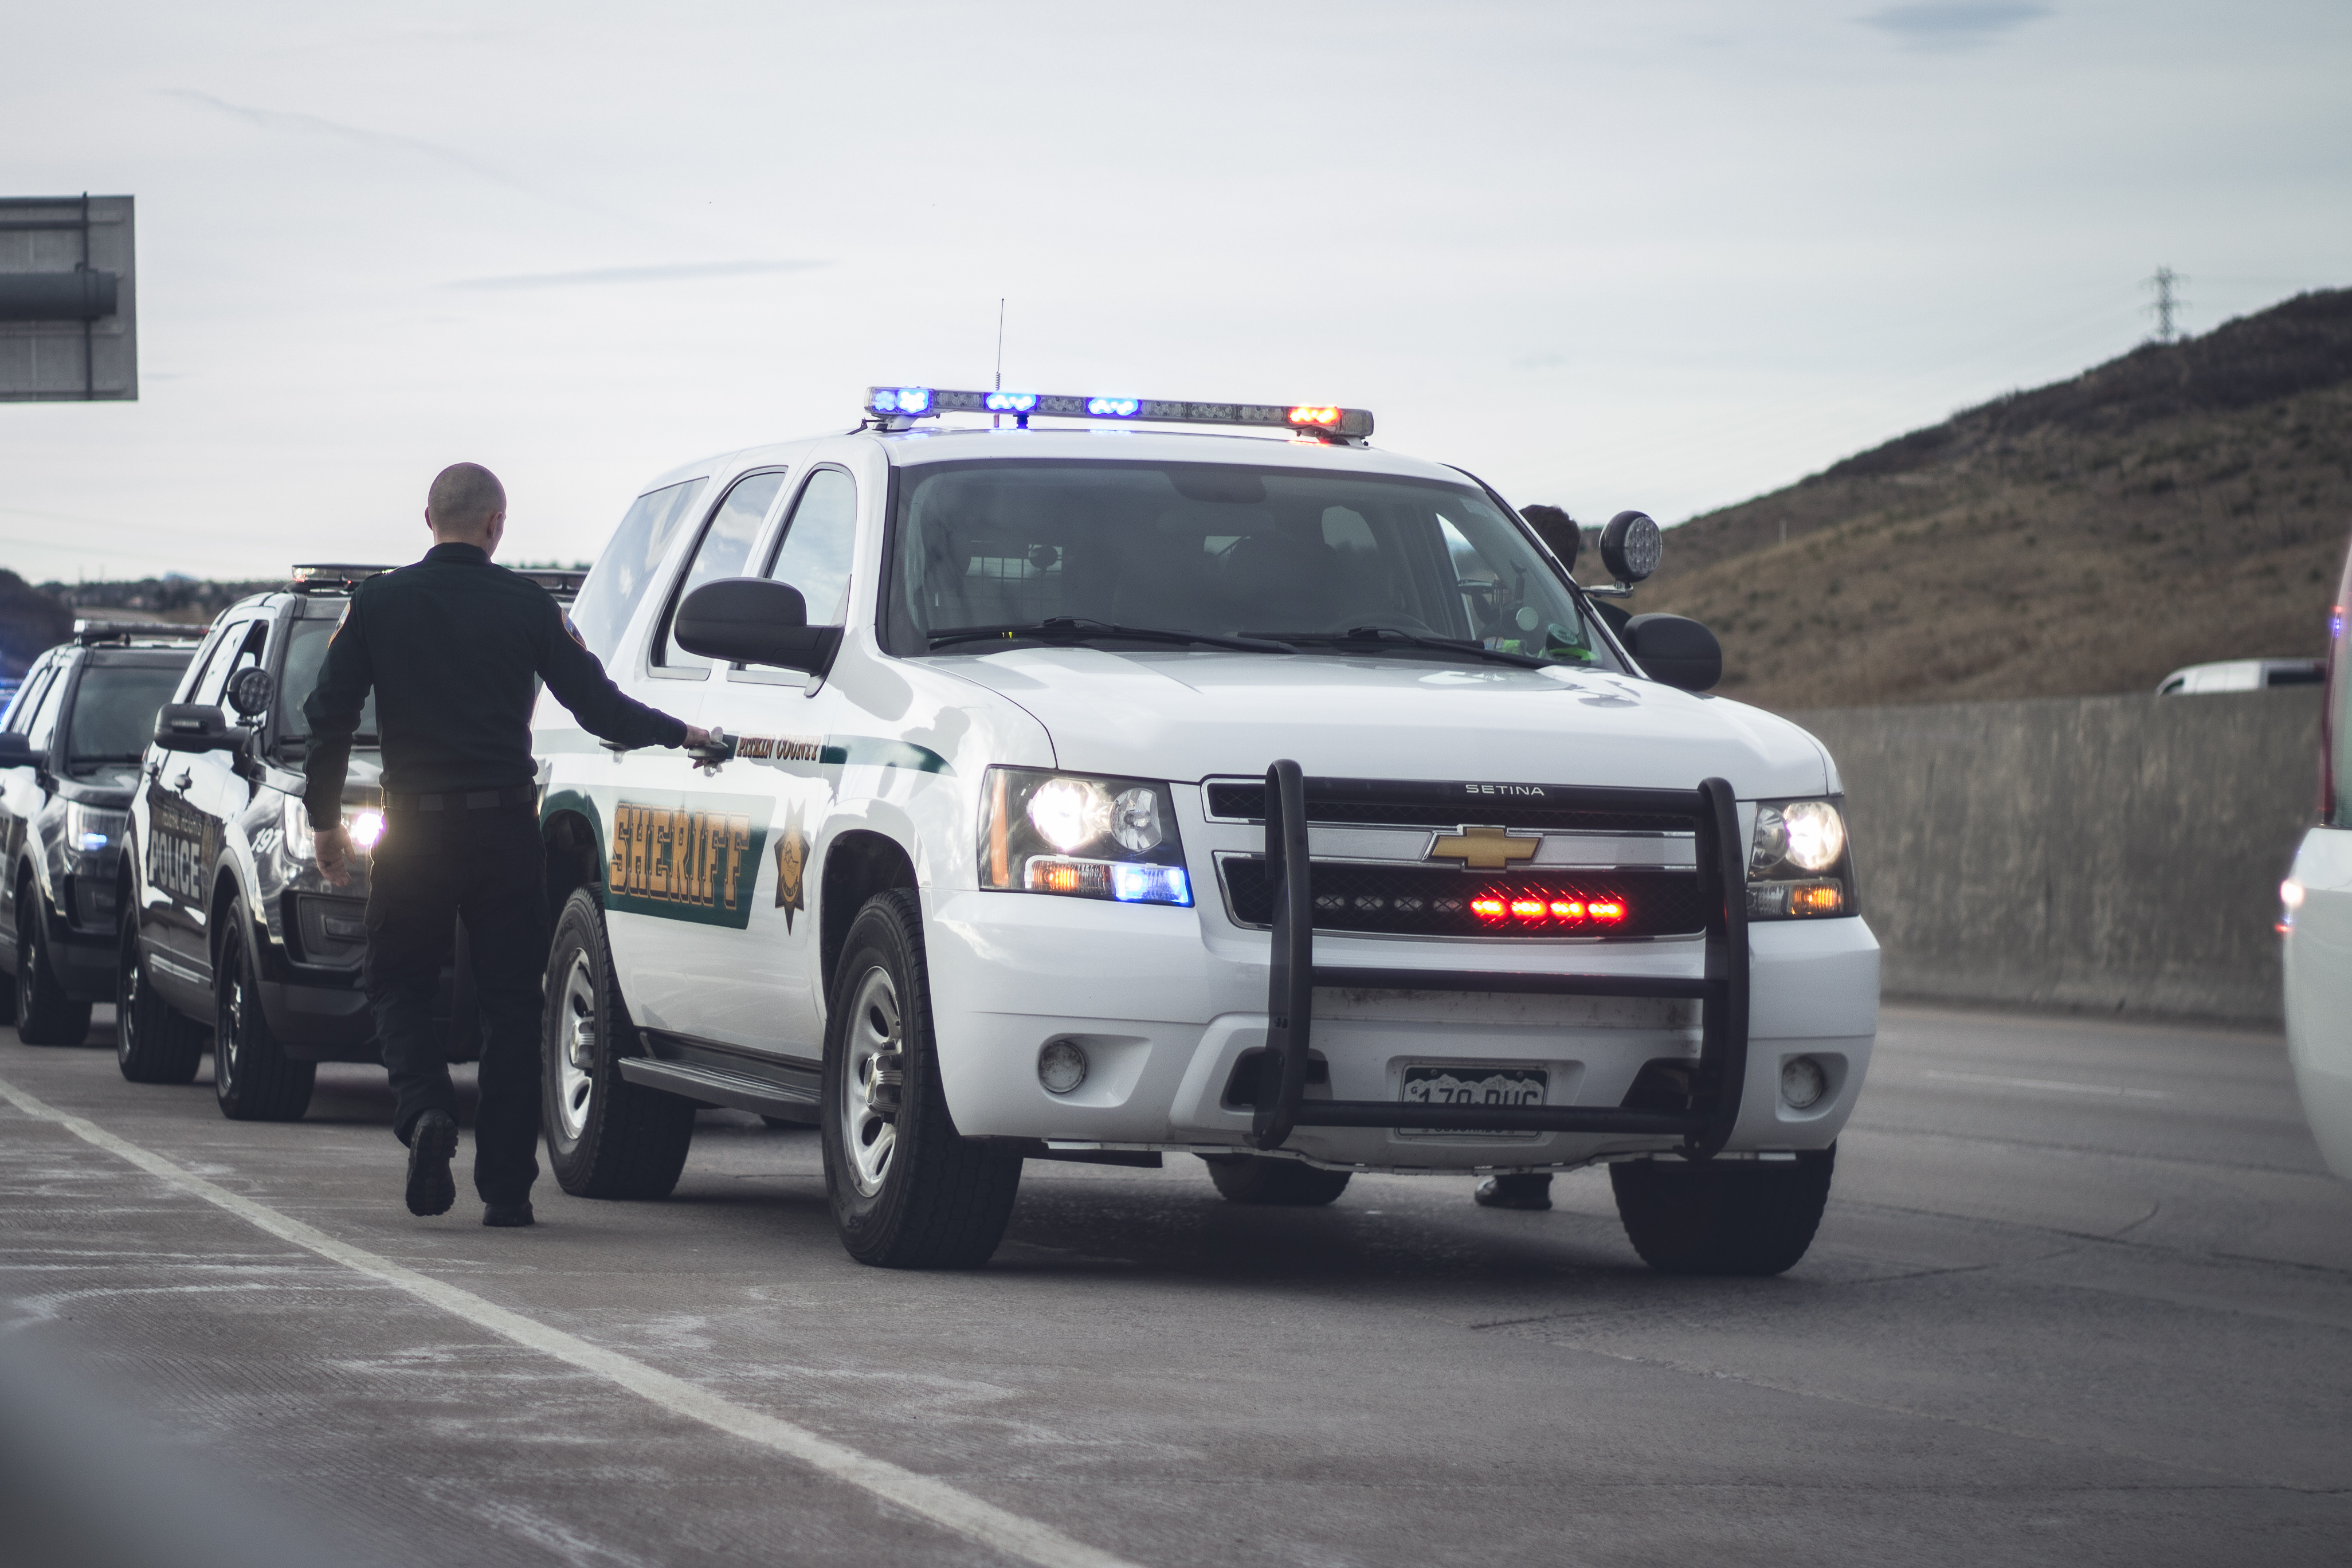 Pitkin county sheriff - chevrolet tahoe photo